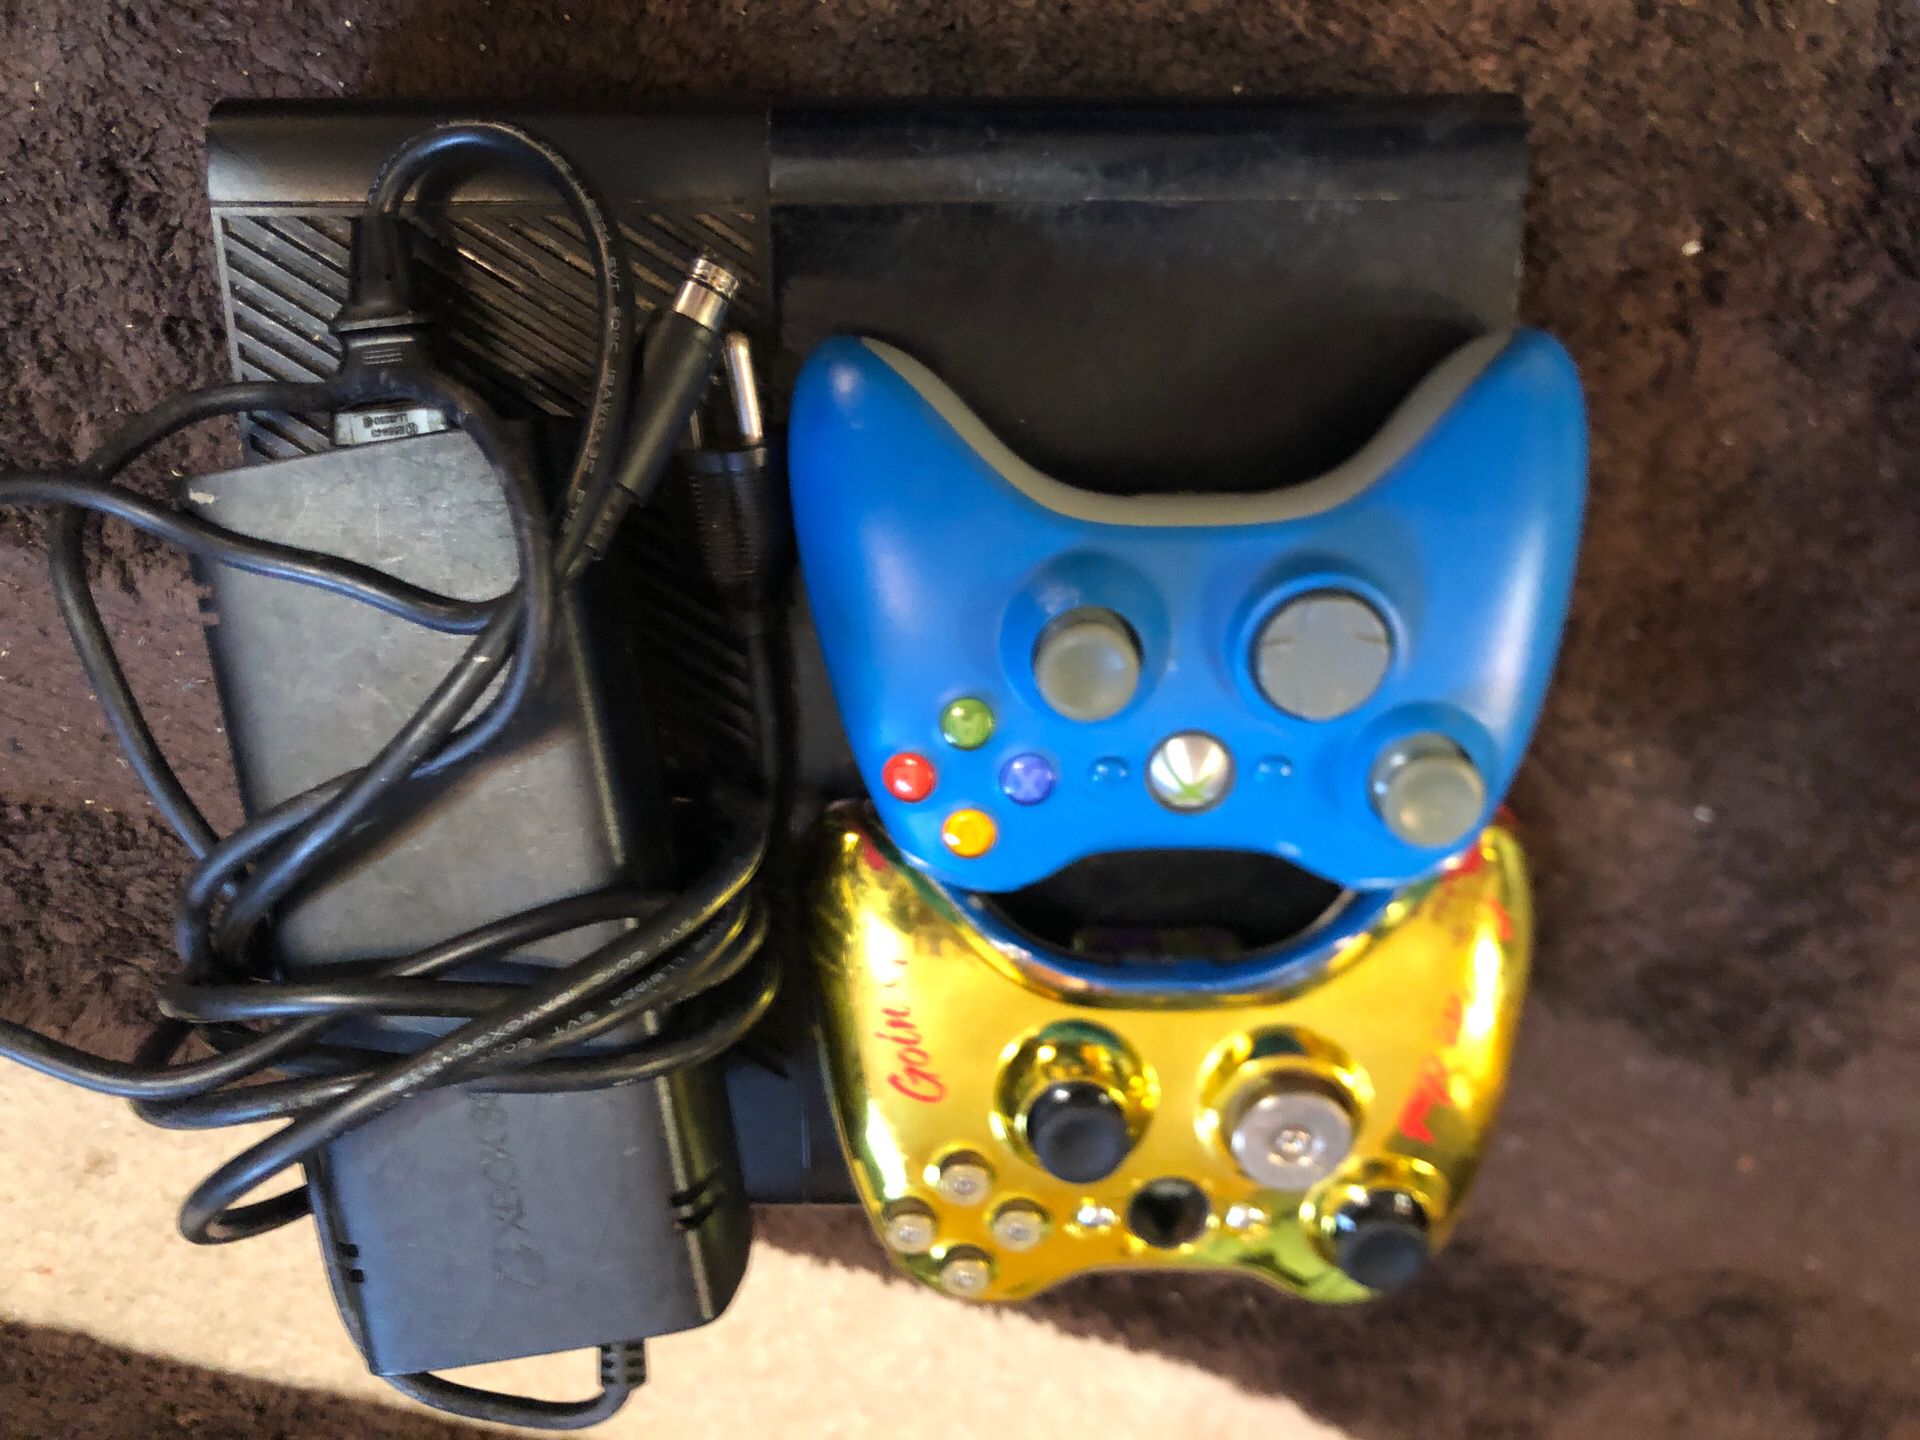 Xbox 360 with two controllers